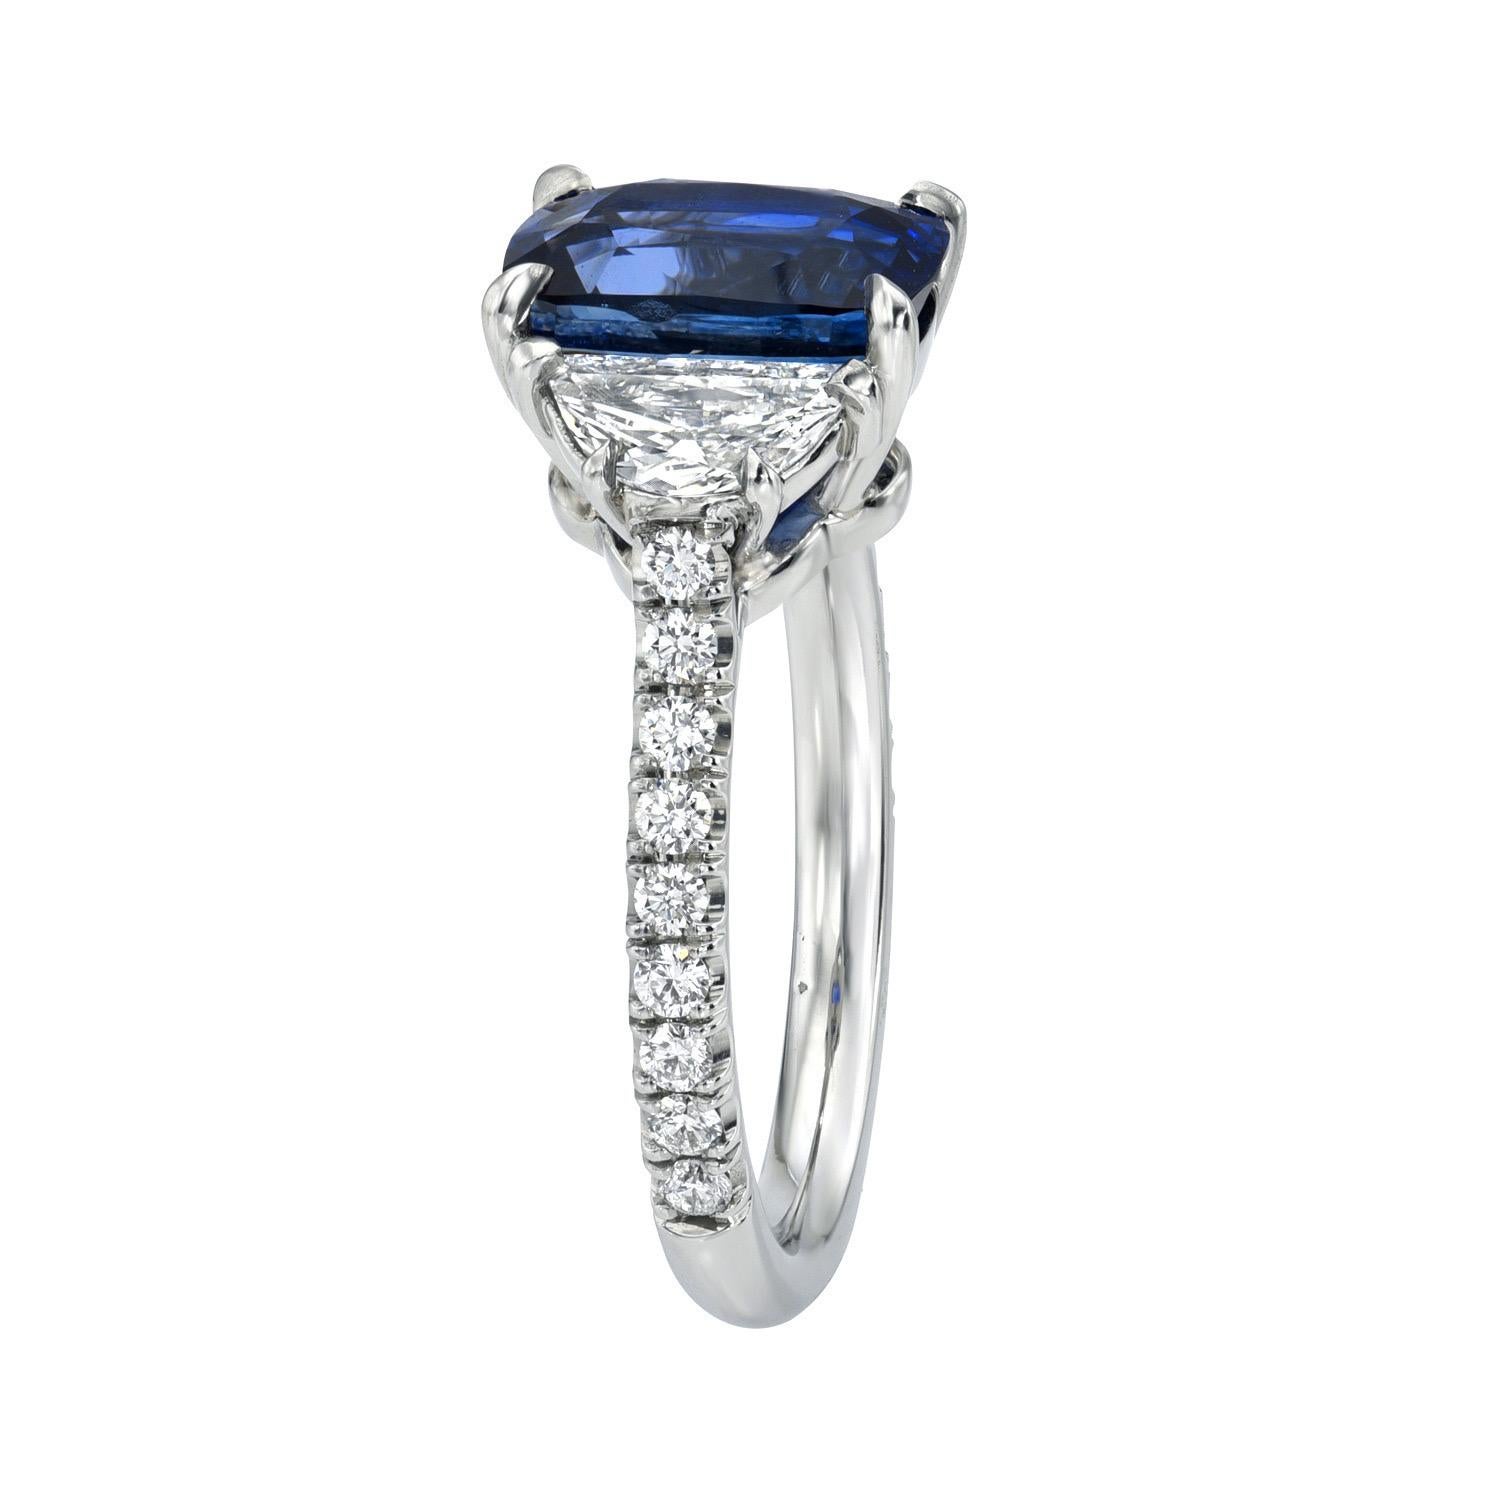 Timeless 3.12 carat Ceylon Blue Sapphire cushion, three stone platinum ring, flanked by a pair of 0.47 carat, E/VS1 half moon diamonds and a total of 0.28 carats round brilliant diamonds.
Ring size 6. Resizing is complementary upon request.
The GIA